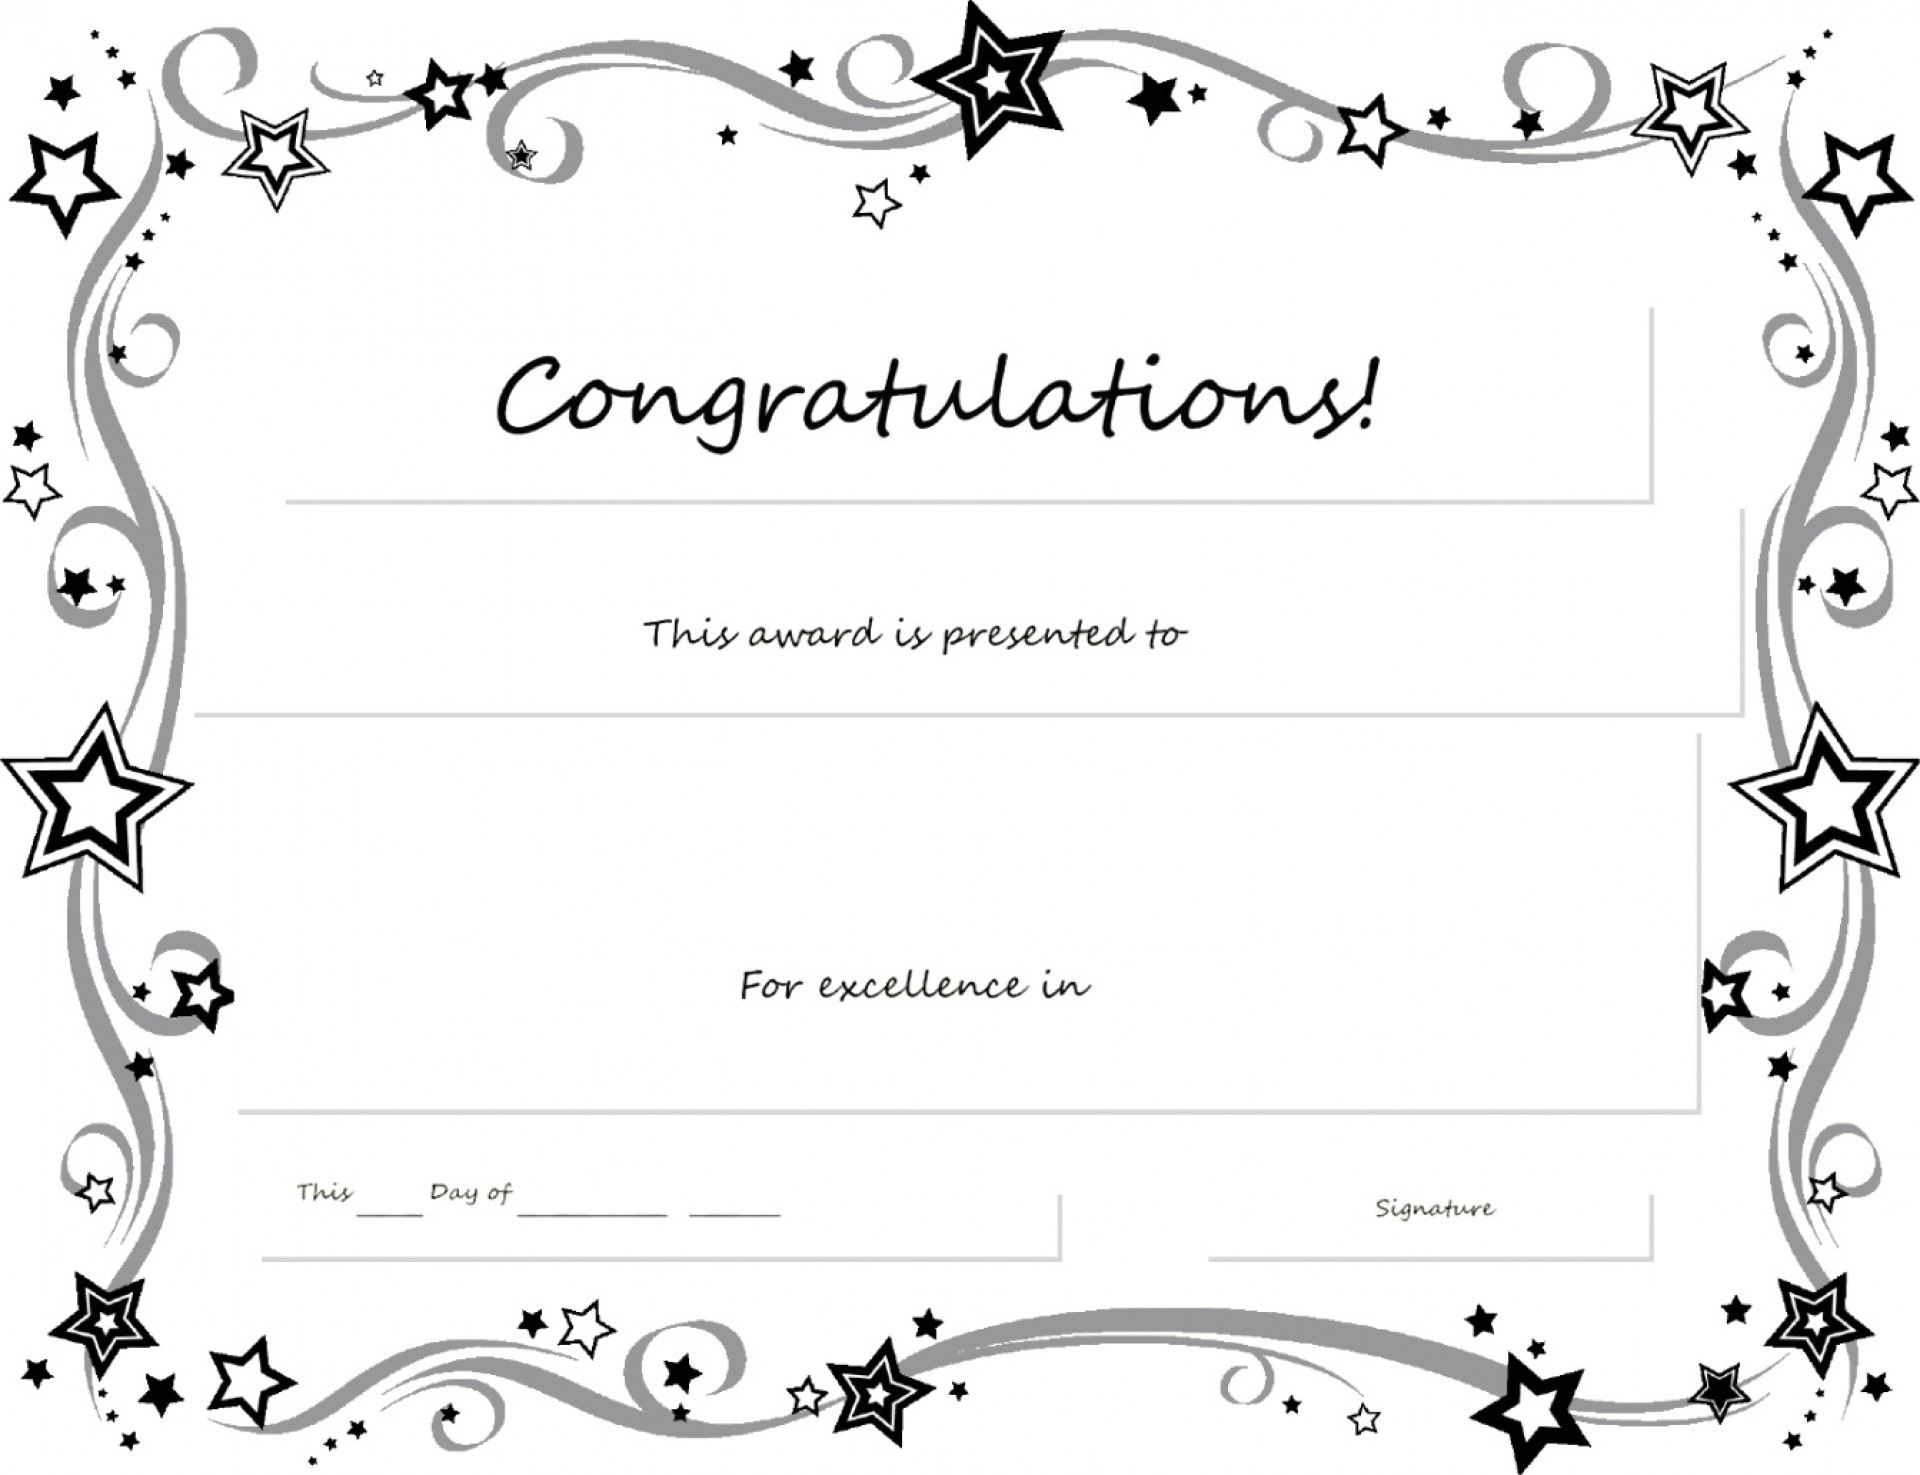 029 Template Ideas Certificate Award Microsoft Word Of Within Congratulations Certificate Word Template